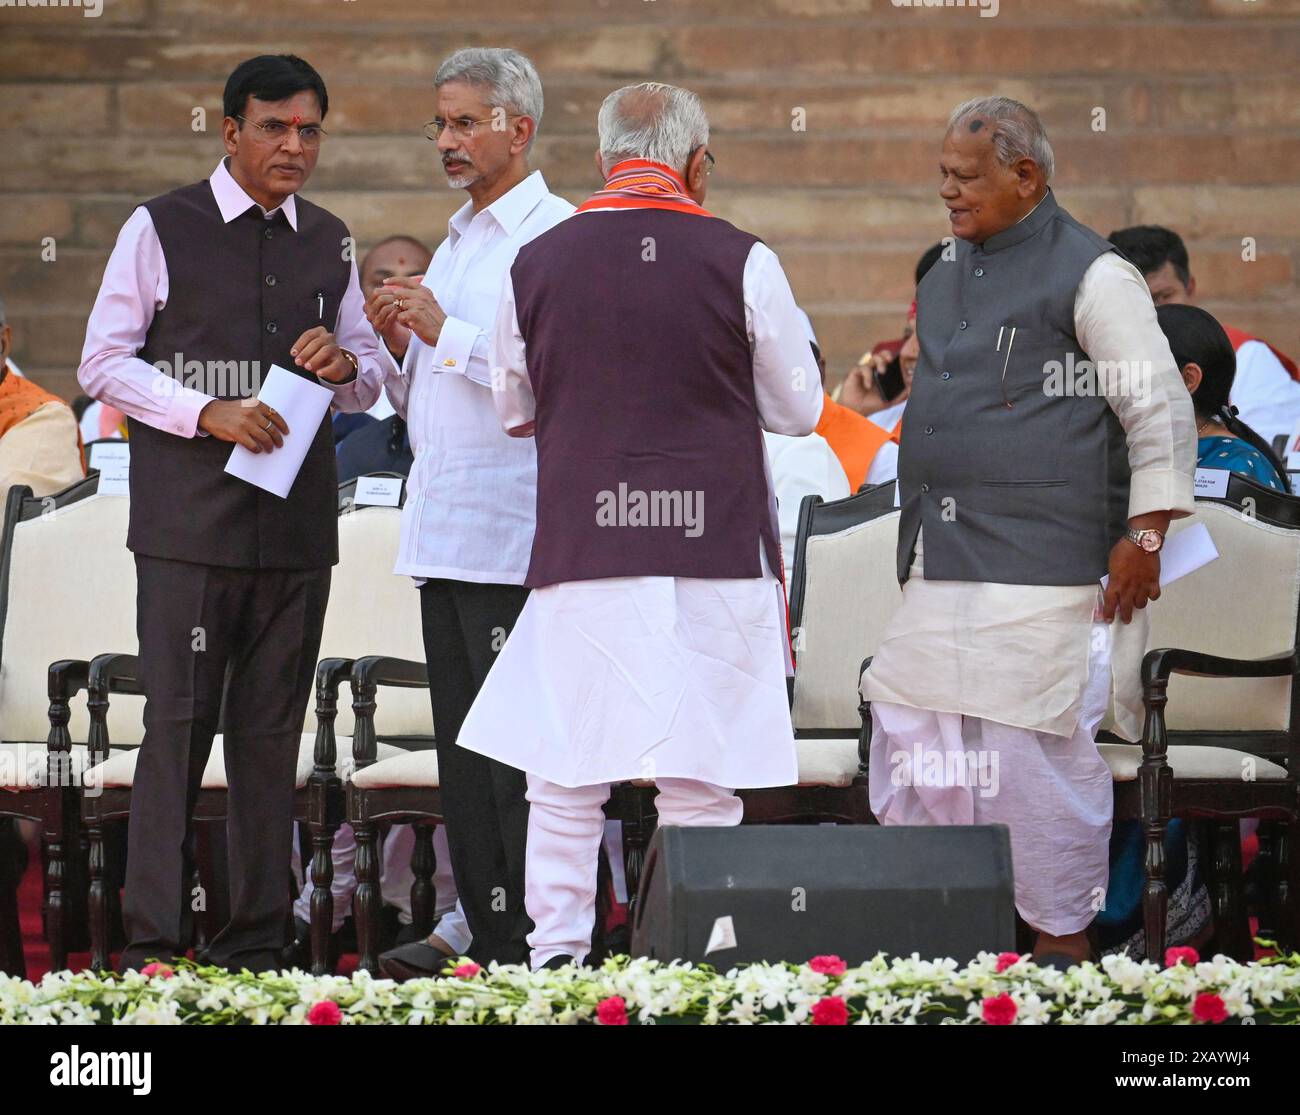 NEW DELHI, INDIA - JUNE 9: Bharatiya Janata Party (BJP) leader Mansukh Mandaviya along with S. Jaishankar and Hindustani Awam Morcha (HAM) leader Jitan Ram Manjhi seen during oath ceremony of Prime Minister Narendra Modi as the Prime Minister of India for the third consecutive term during swearing-in ceremony, at Rashtrapati Bhavan on June 9, 2024 in New Delhi, India. Narendra Modi took over as the Prime Minister of India for a third consecutive term at a glittering ceremony at the forecourt of Rashtrapati Bhavan. Along with PM Modi, a new council of ministers was sworn in with 71 members, mar Stock Photo